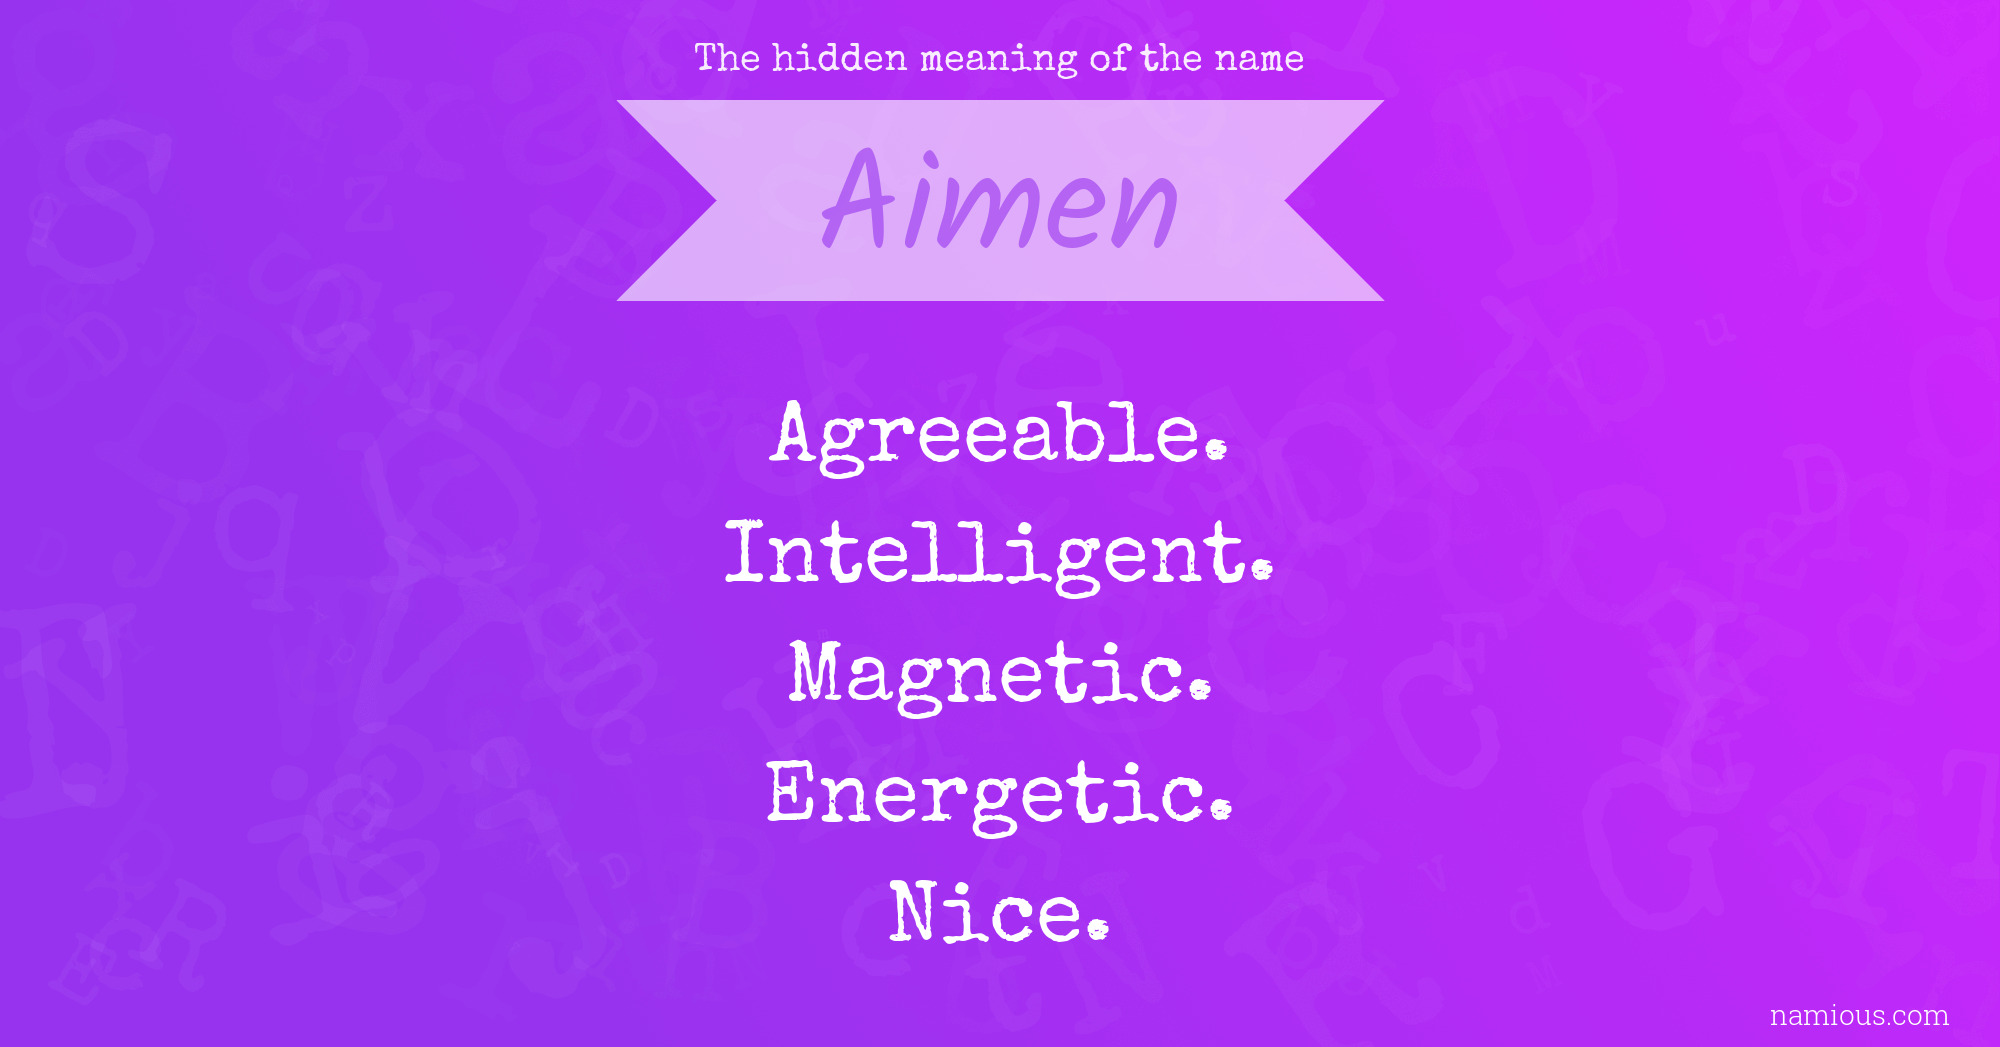 The hidden meaning of the name Aimen